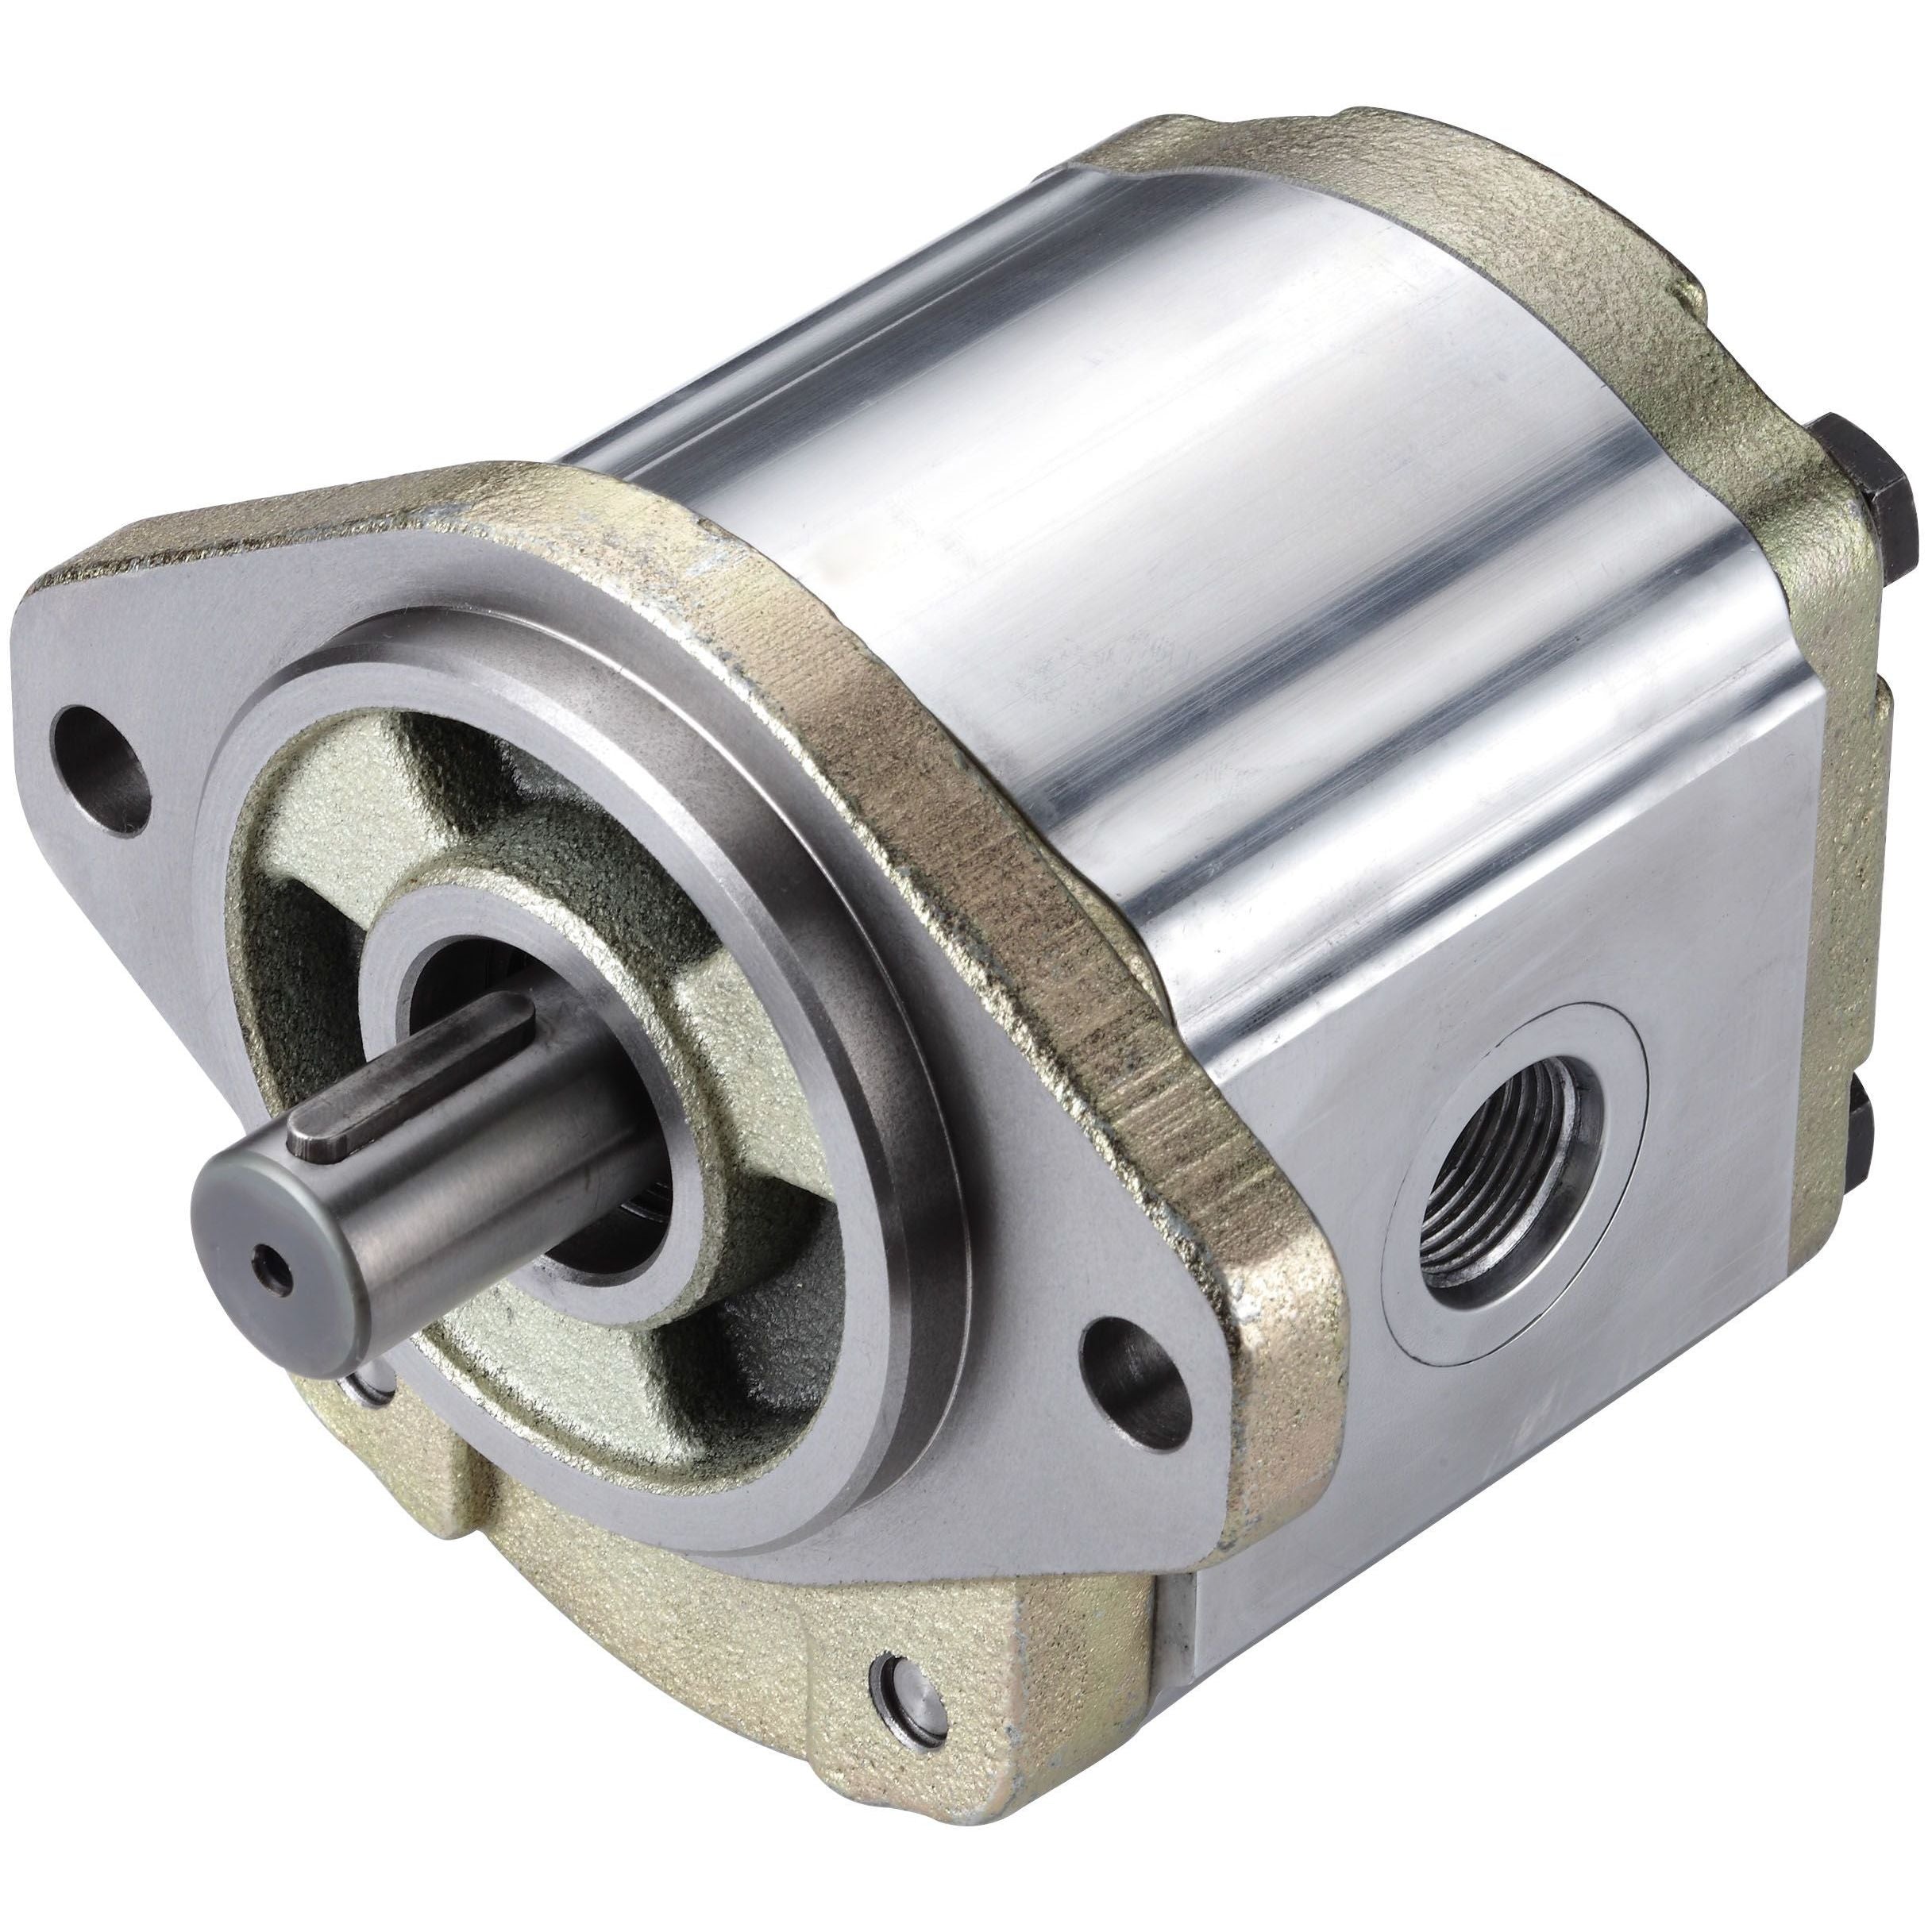 3GB8U238L : Honor Gear Pump, CCW Rotation, 38cc (2.32in3), 18.07 GPM, 3500psi, 3000 RPM, #20 SAE (1.25") In, #12 SAE (3/4") Out, Splined Shaft 13-Tooth, 16/32 Pitch, SAE B 2-Bolt Mount